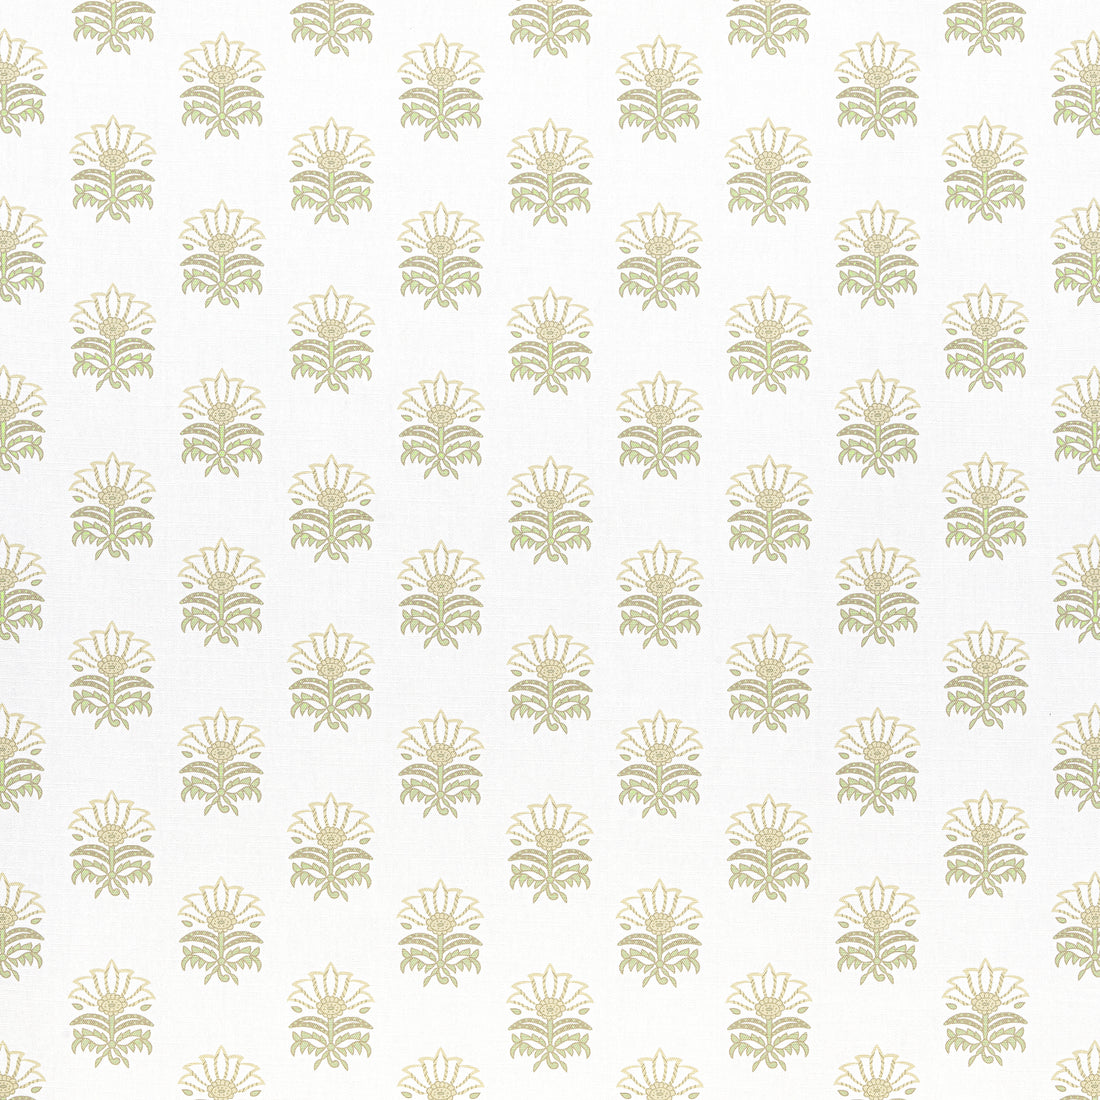 Milford fabric in beige and green color - pattern number AF15158 - by Anna French in the Antilles collection